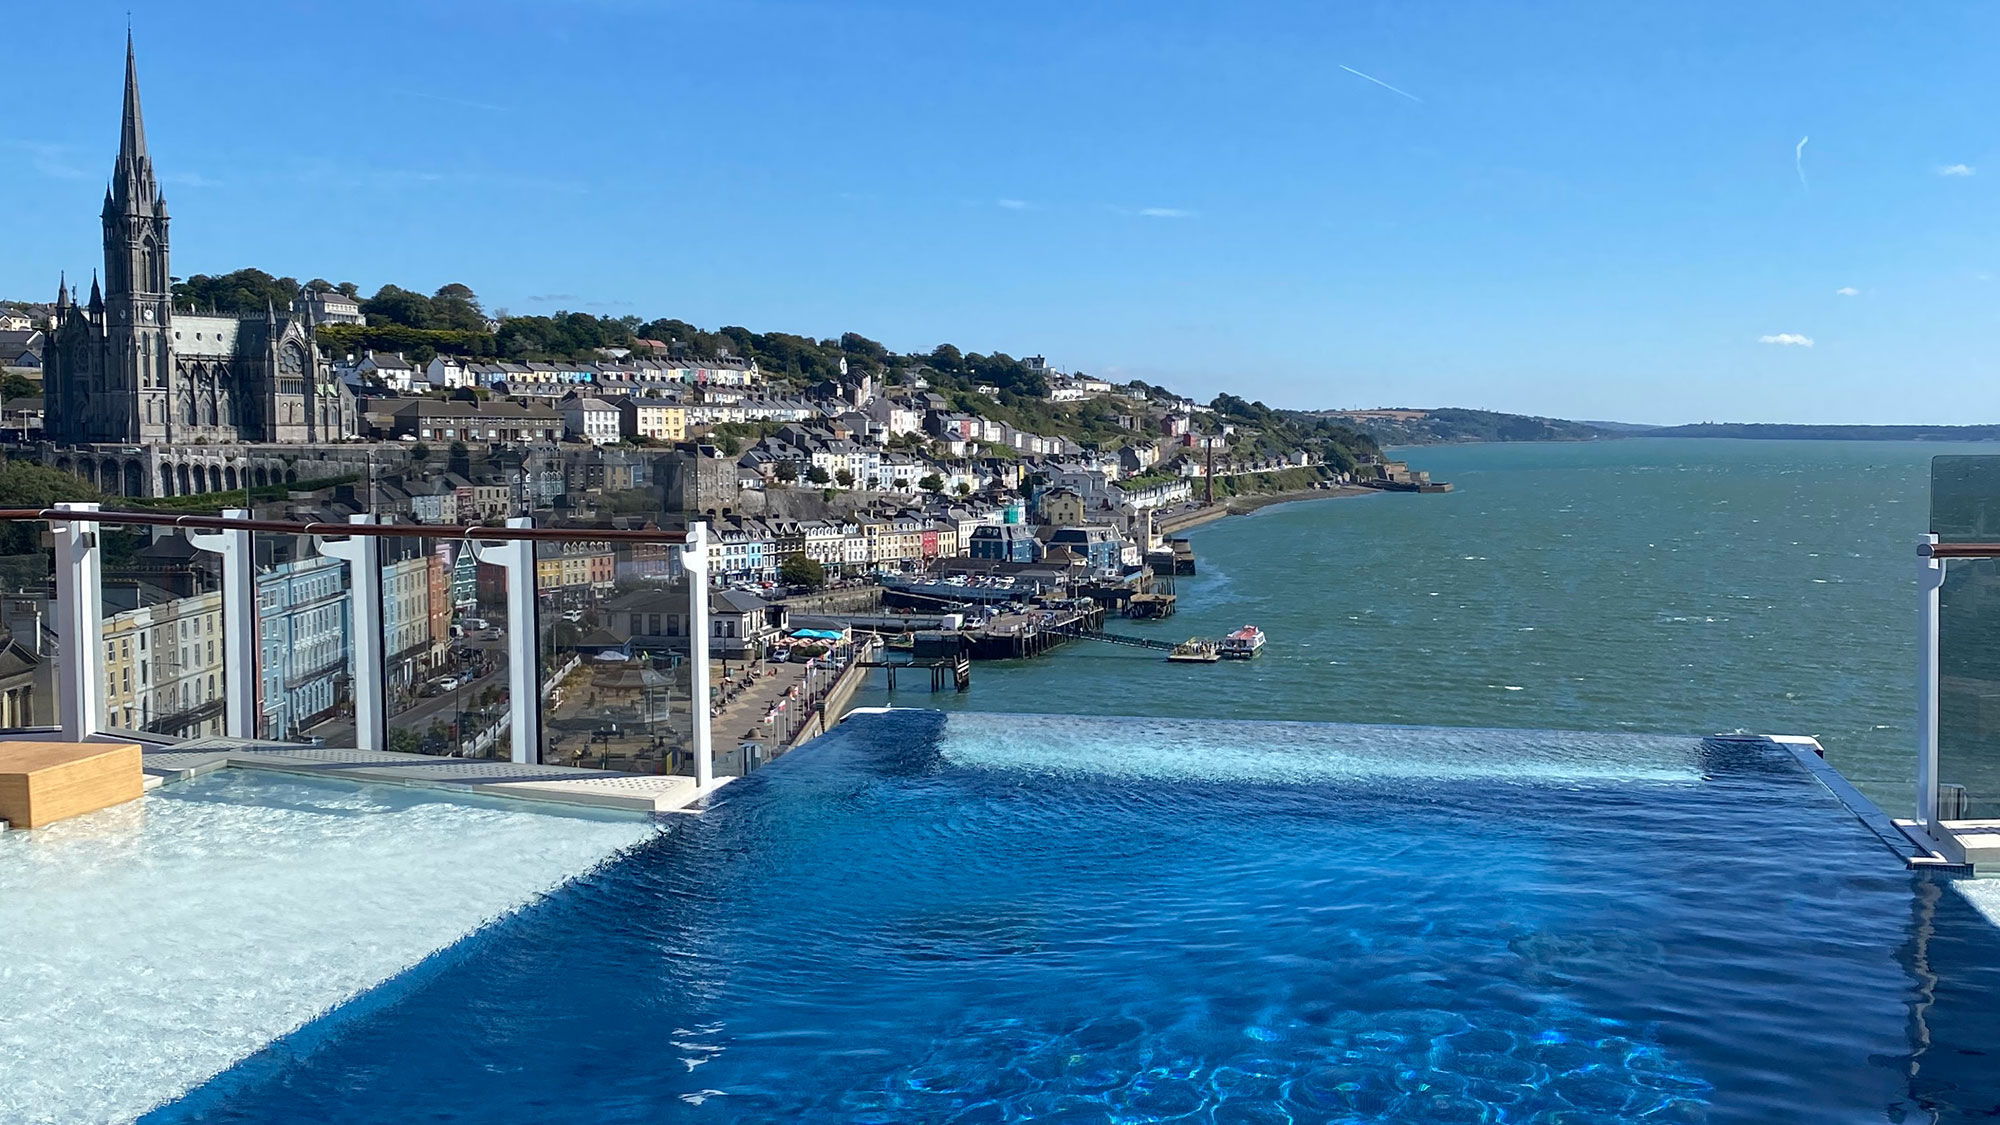 On the Norwegian Prima, The Haven's infinity pool offers a view off the aft of the ship in Cobh, Ireland.